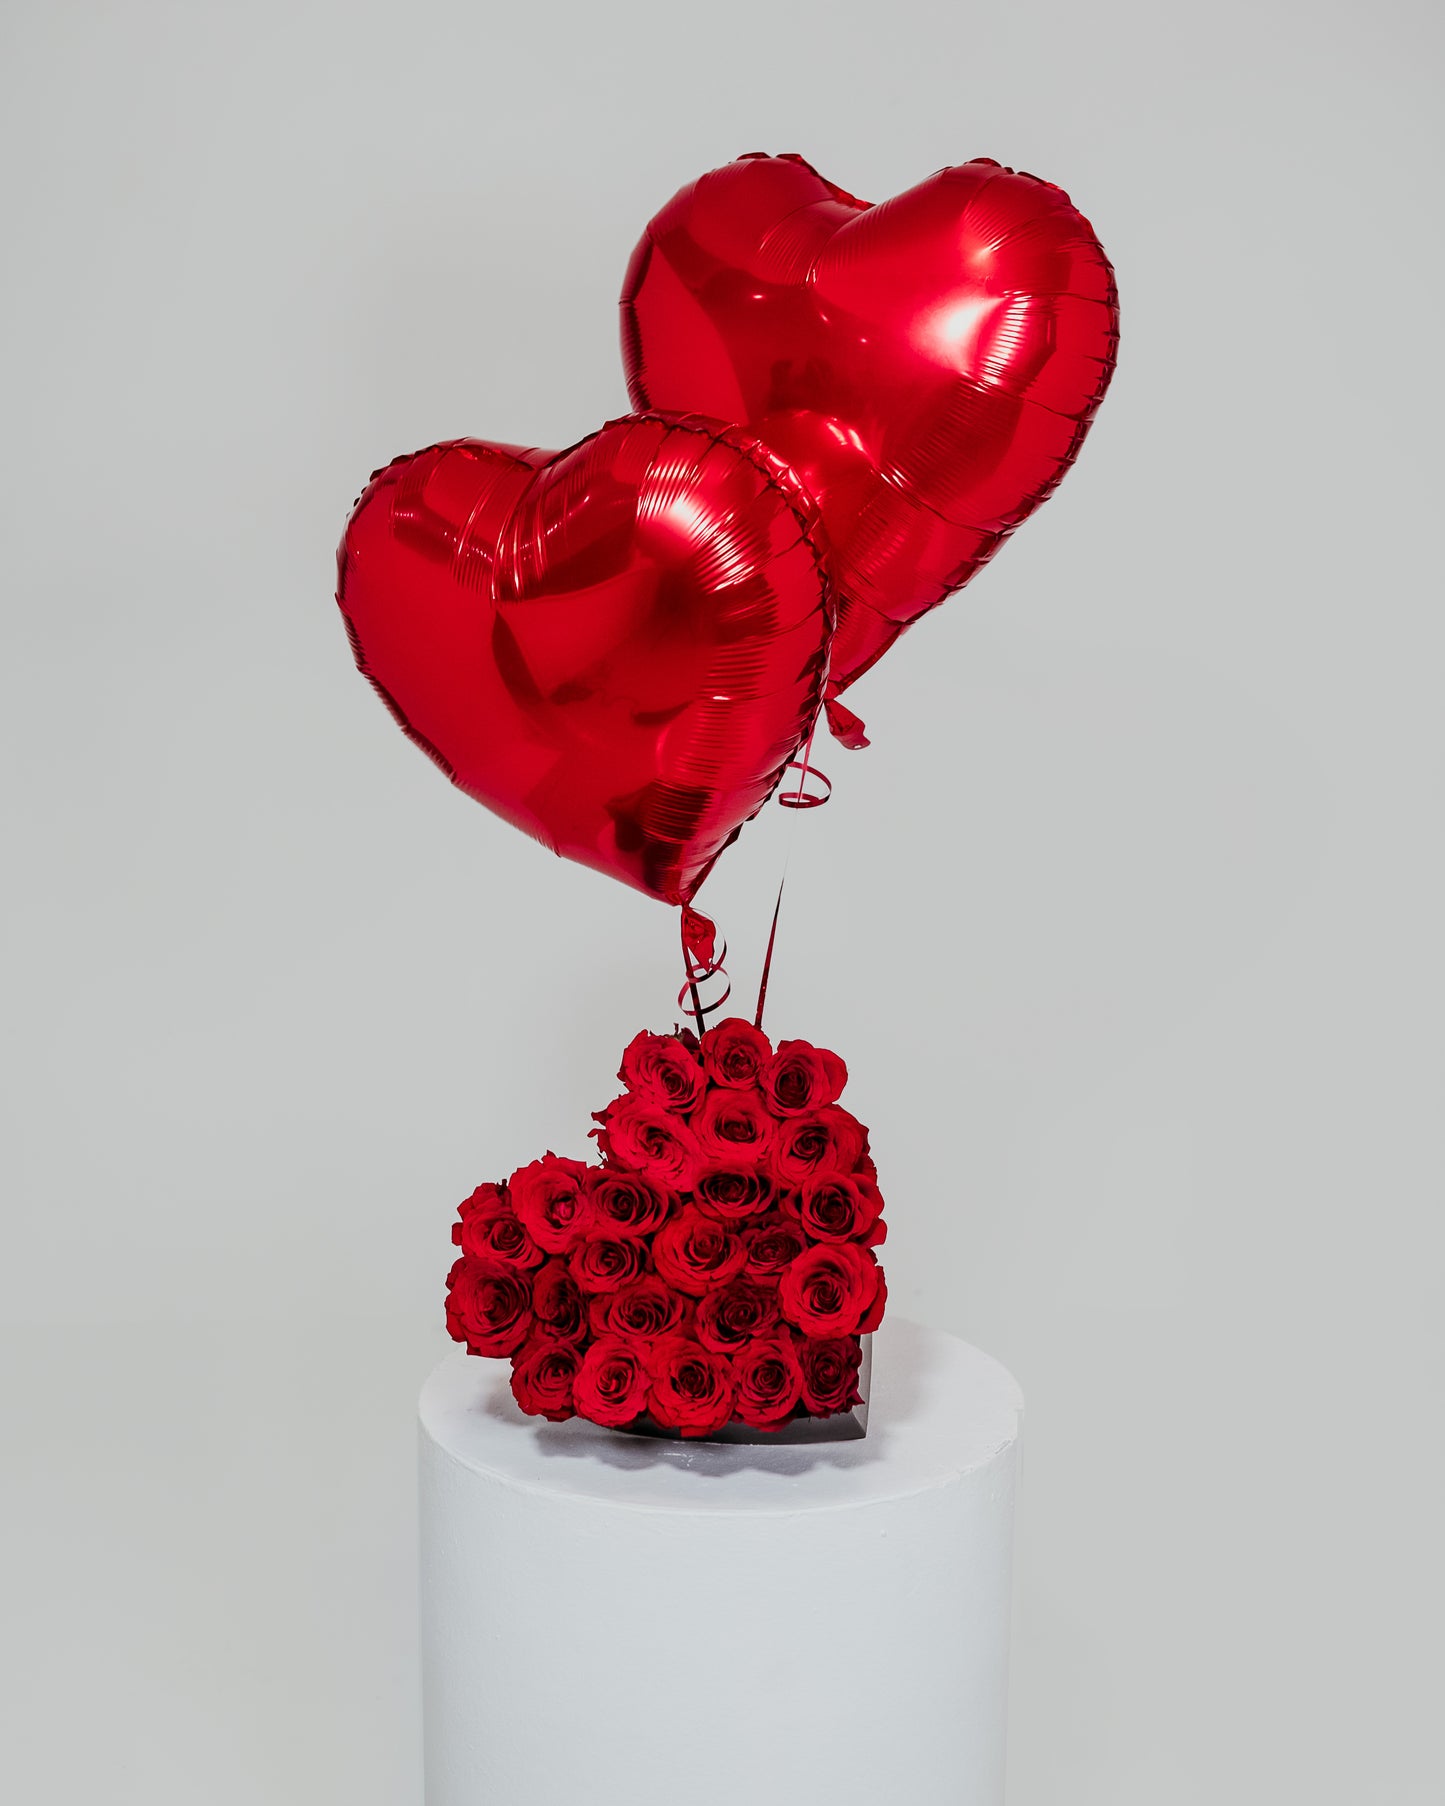 A medium-sized heart-shaped arrangement crafted from vibrant red roses, adorned with heart-shaped balloons, a delightful expression of love for Valentine's Day.